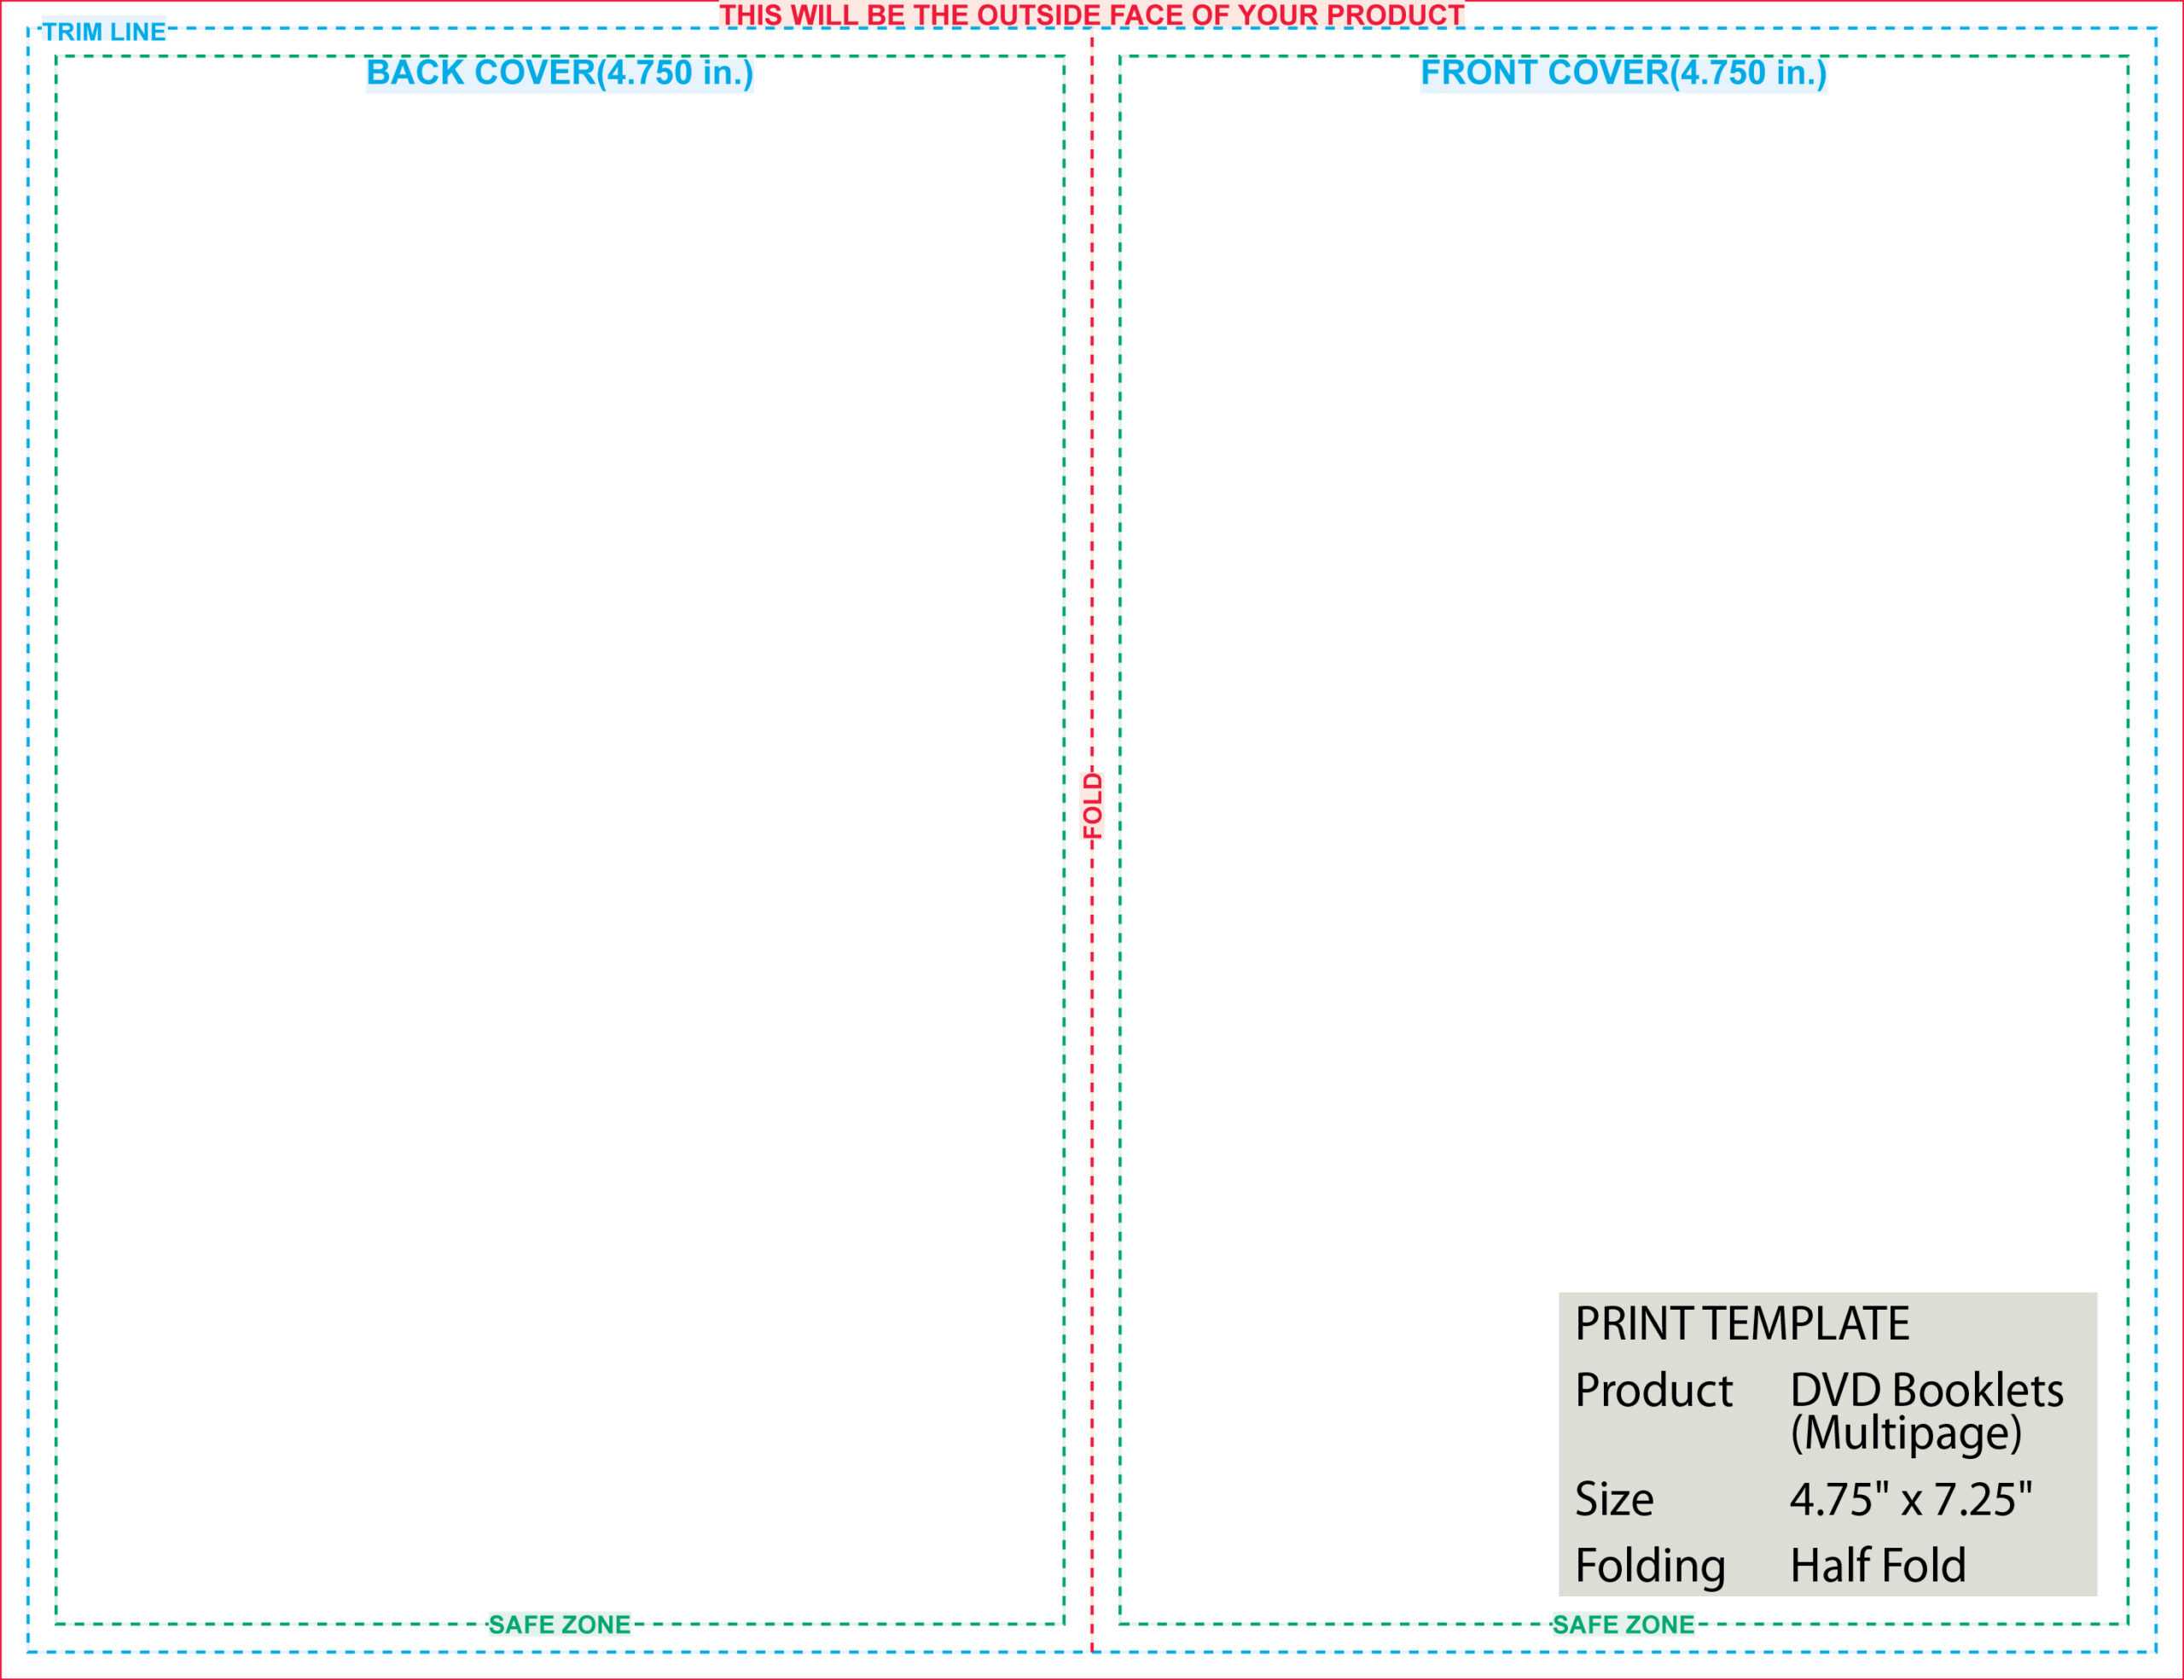 007 Template Ideas 75X7 25 Multipage Dvd Booklets Quarter Pertaining To Half Fold Card Template